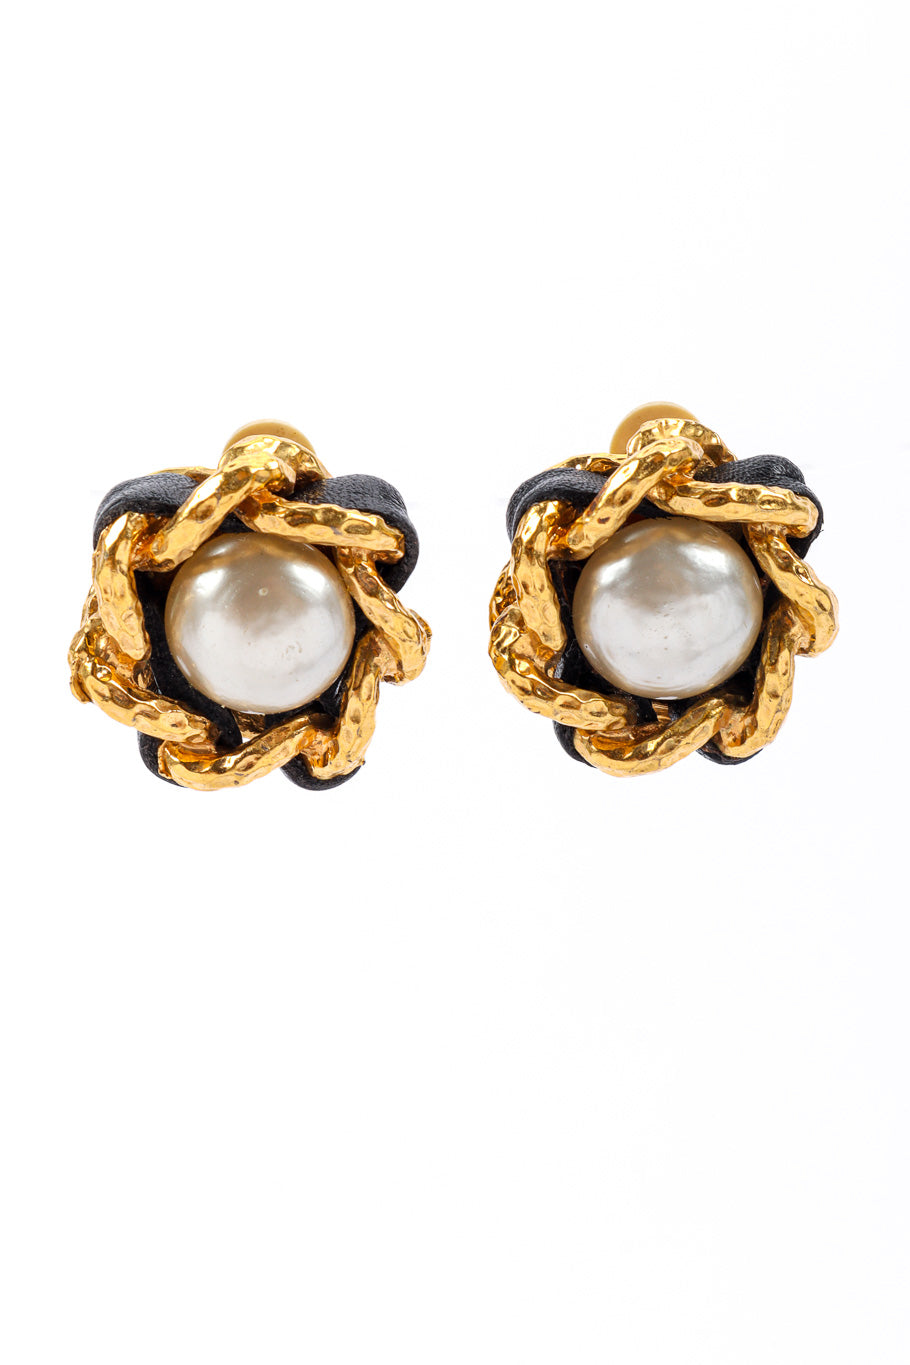 Chanel Coco Mark 94p Gold Earrings 0033 Chanel